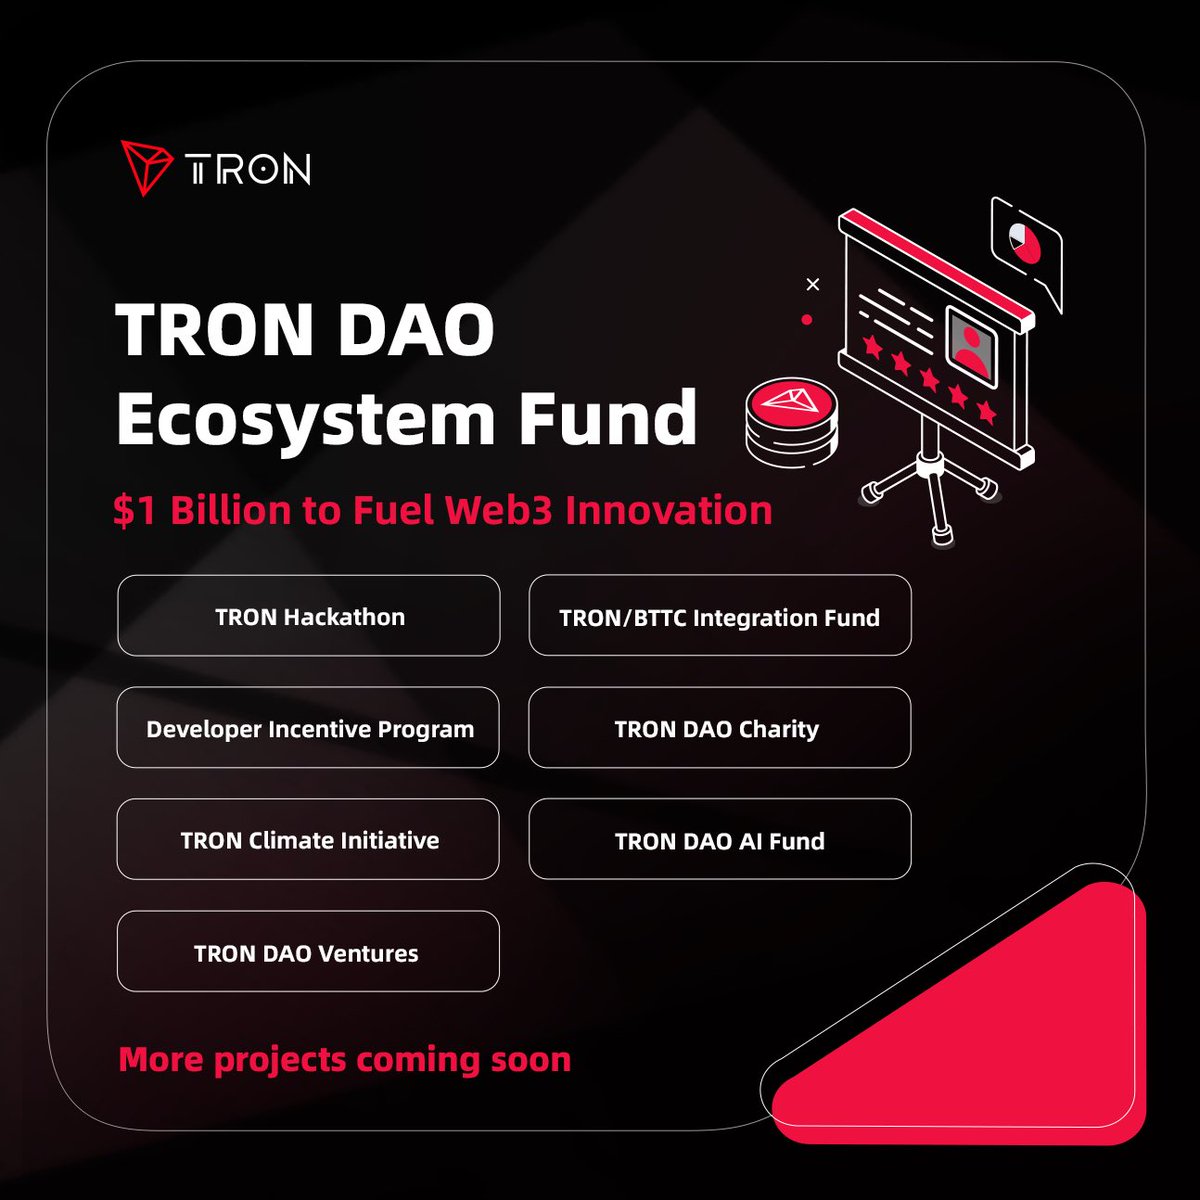 #TRONICS , building the future of Web3 is now brighter than ever. 👀 With the #TRONDAO Ecosystem Fund - Grants, Hackathons & more! 🚀 Details 👇